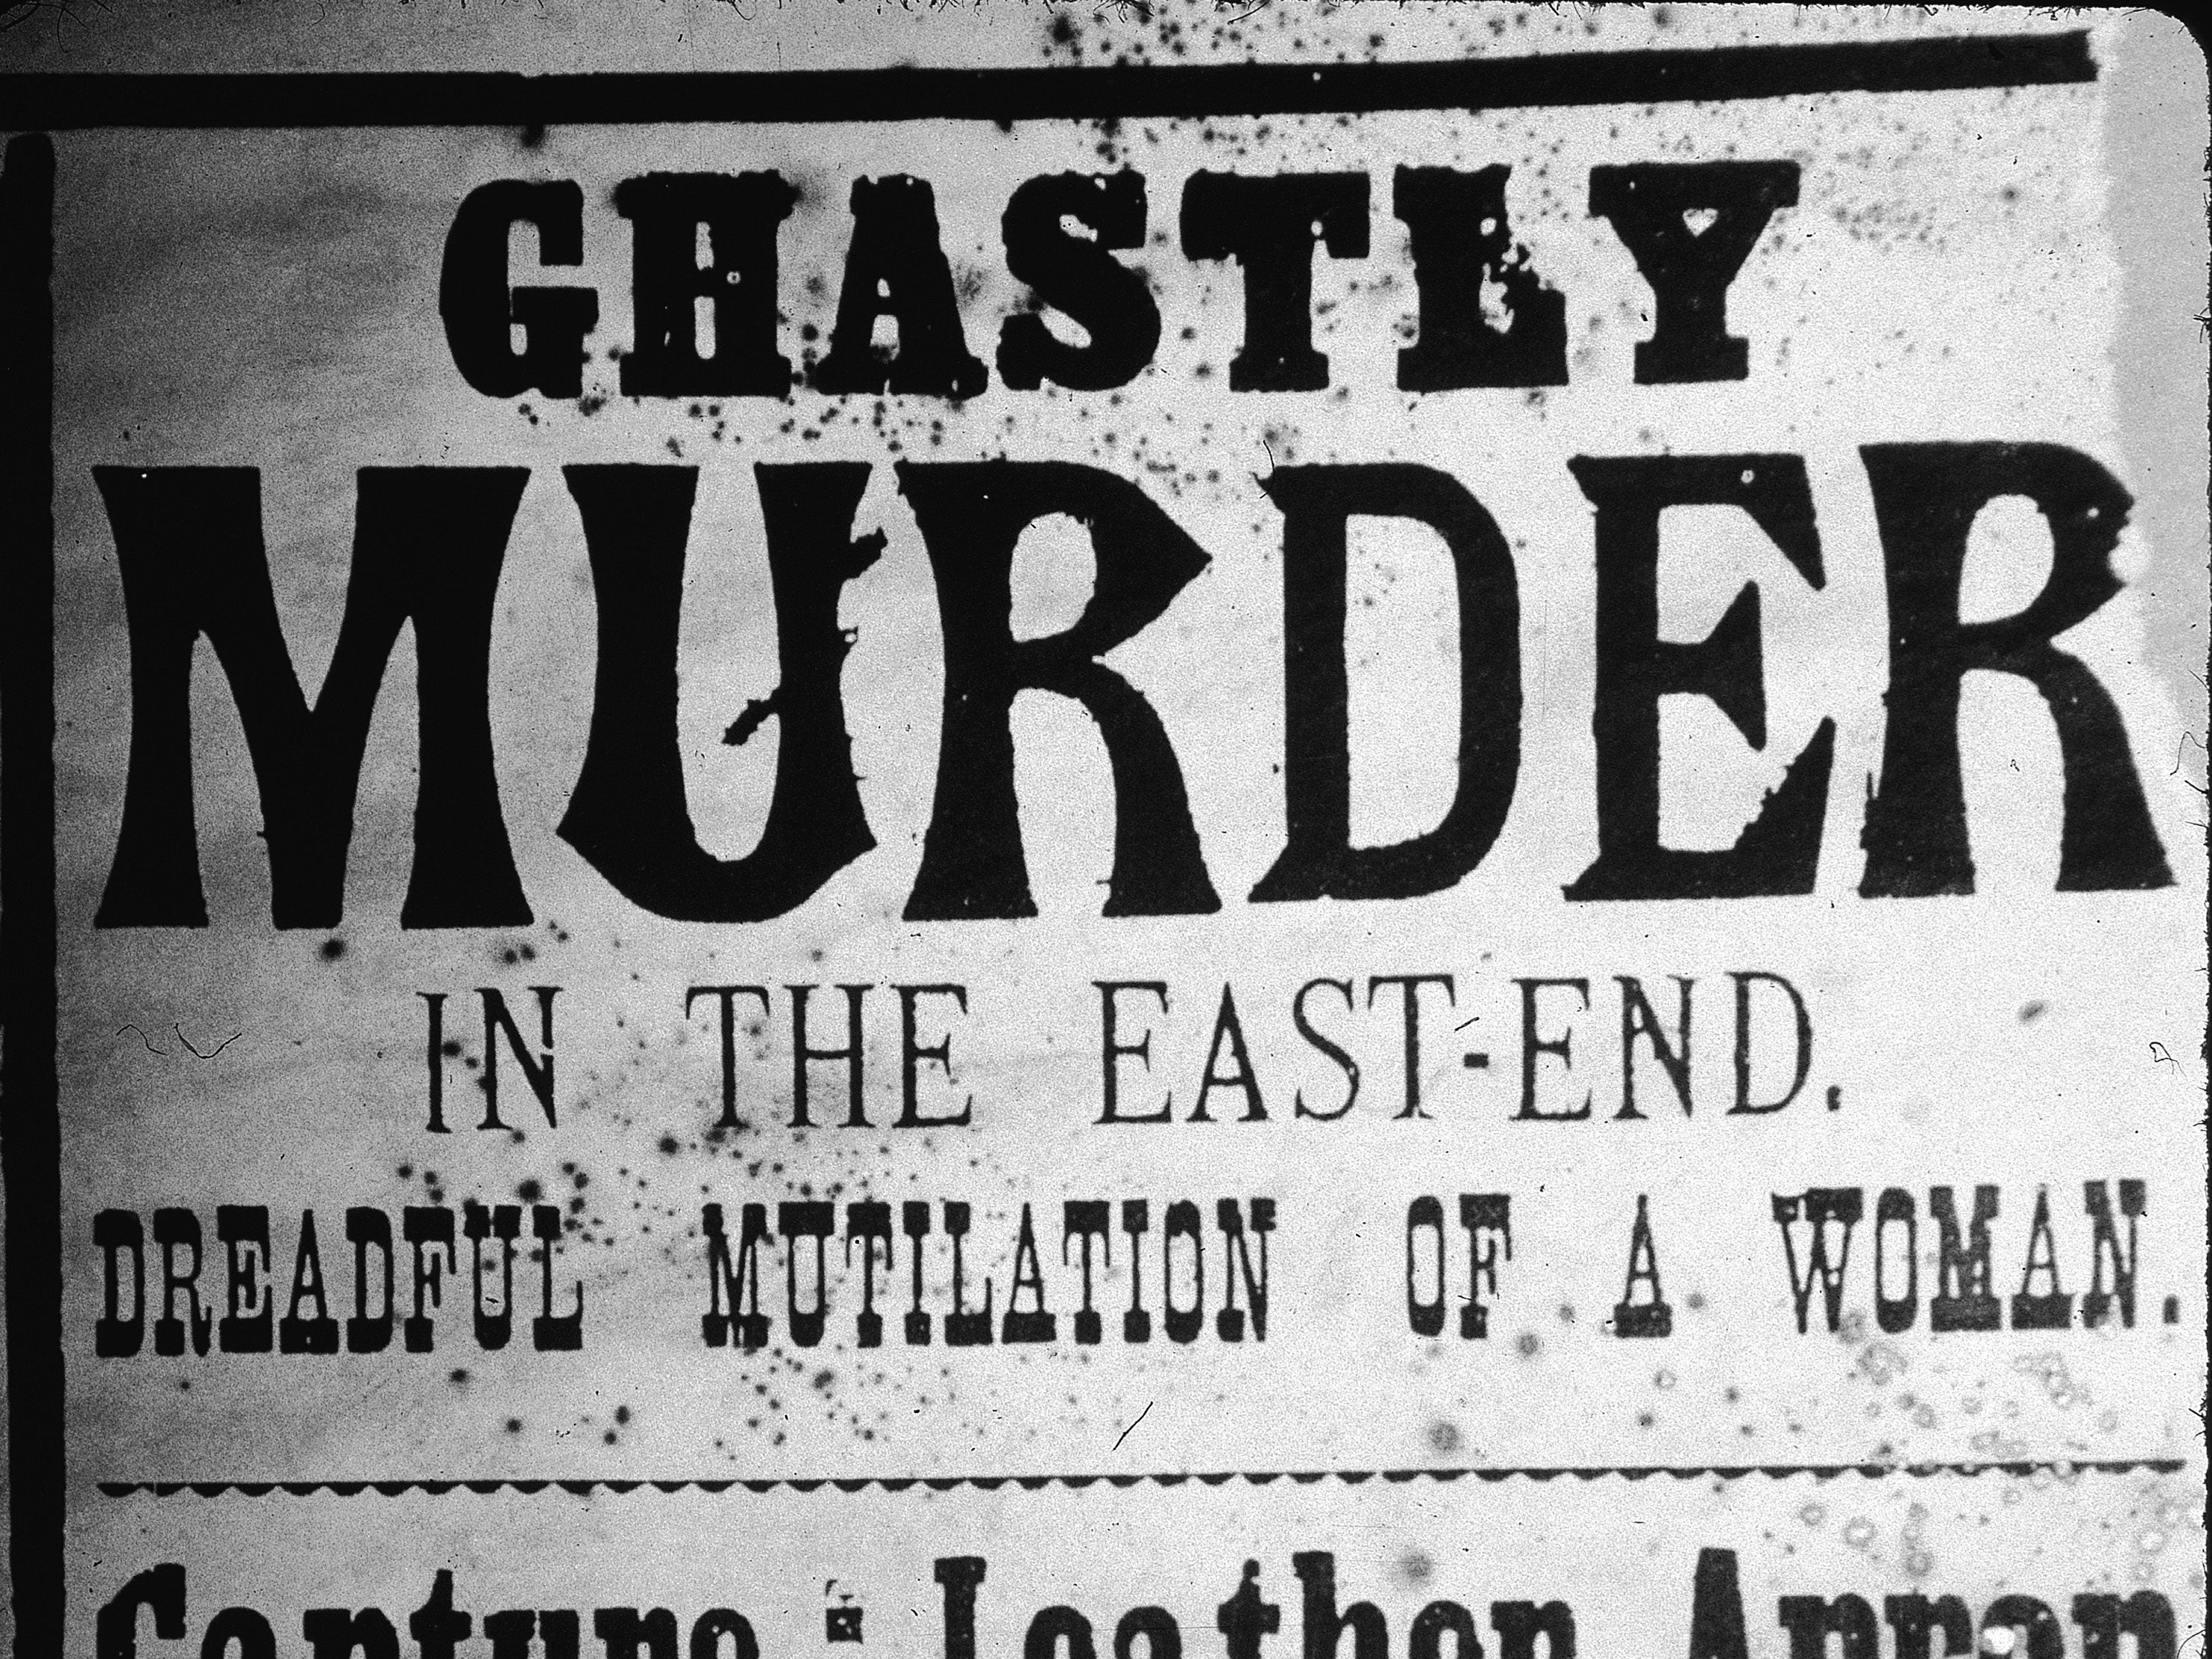 A newspaper front page from 1888 reports on a Jack the Ripper murder